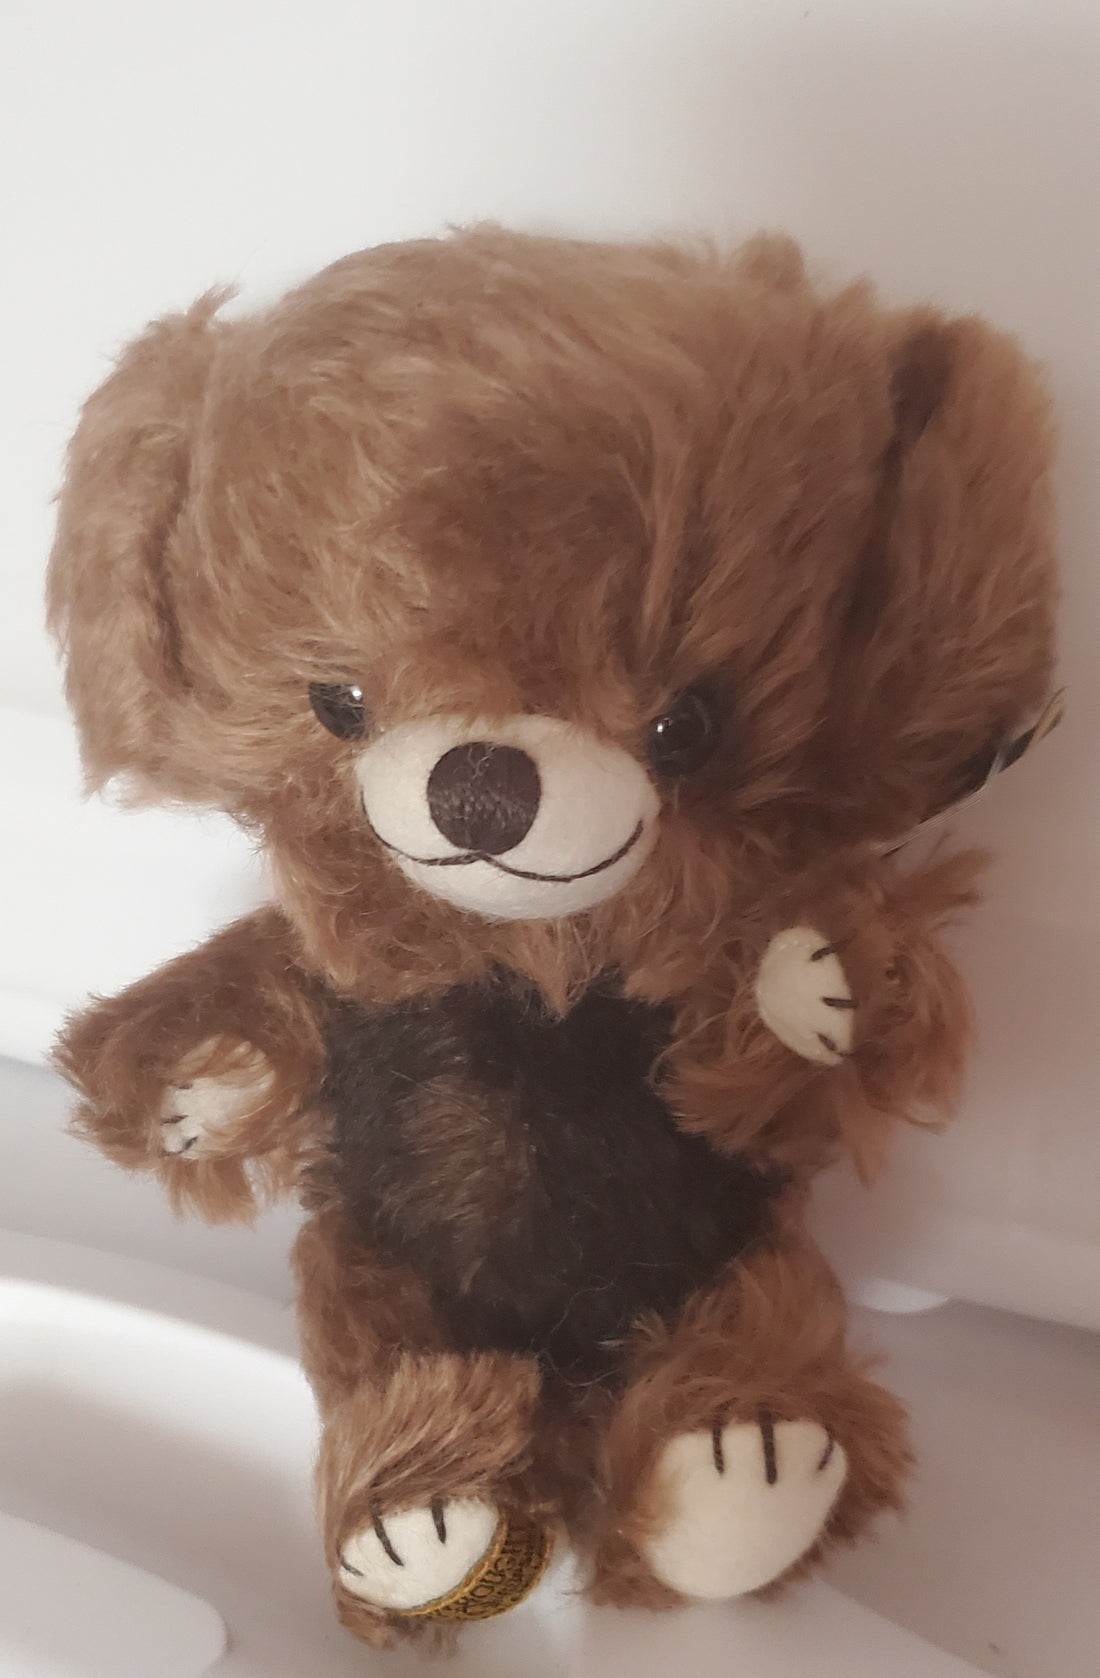 Chocolate Macaron - 7"  Cheeky Mohair Bear (bells in ears) by Merrythought